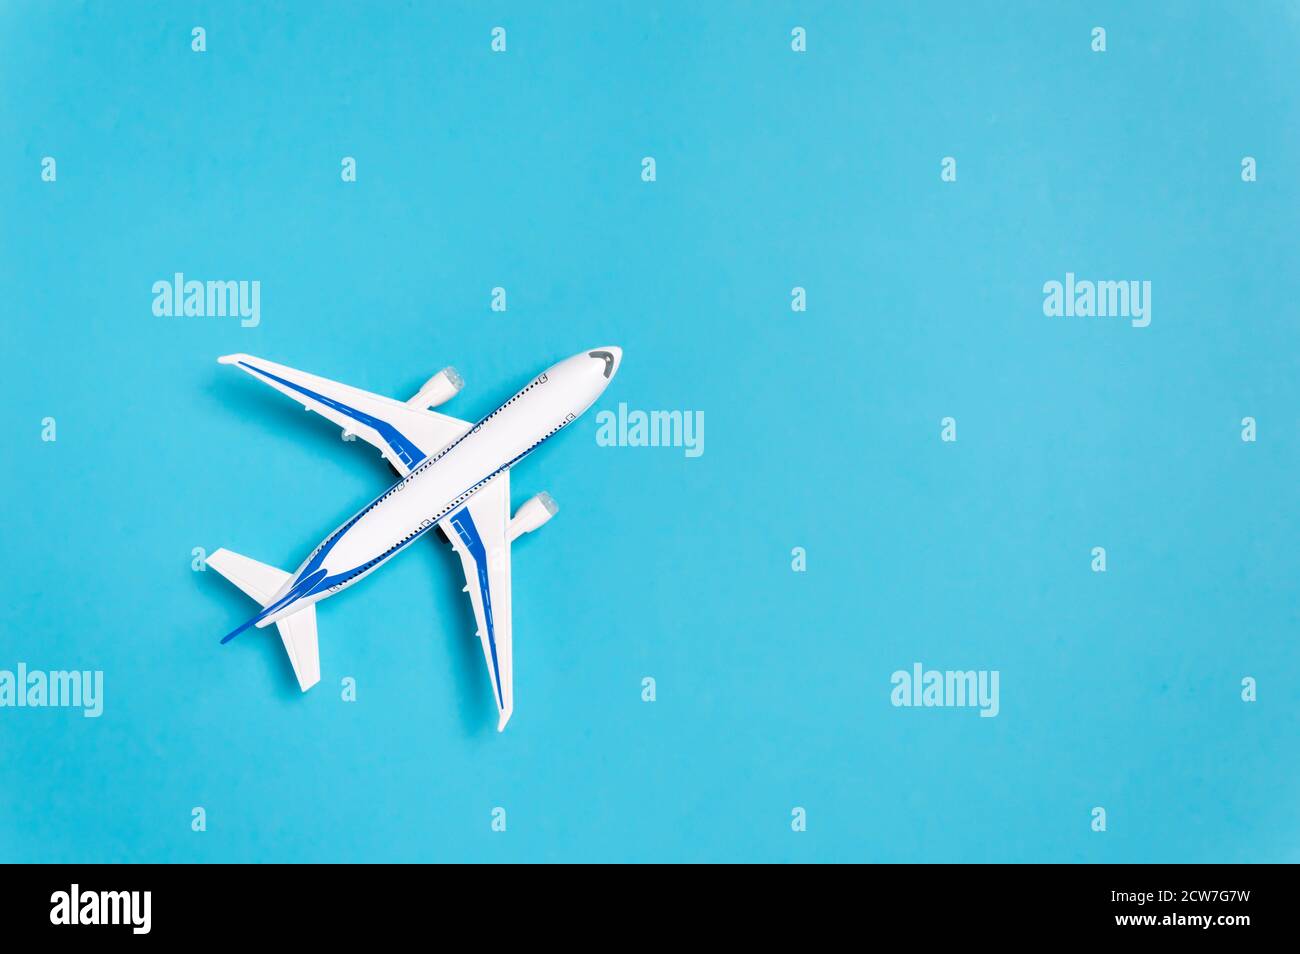 White airplane on blue background with copy space for text. Minimal travel concept. Flat lay style composition for travel agency or airline Stock Photo